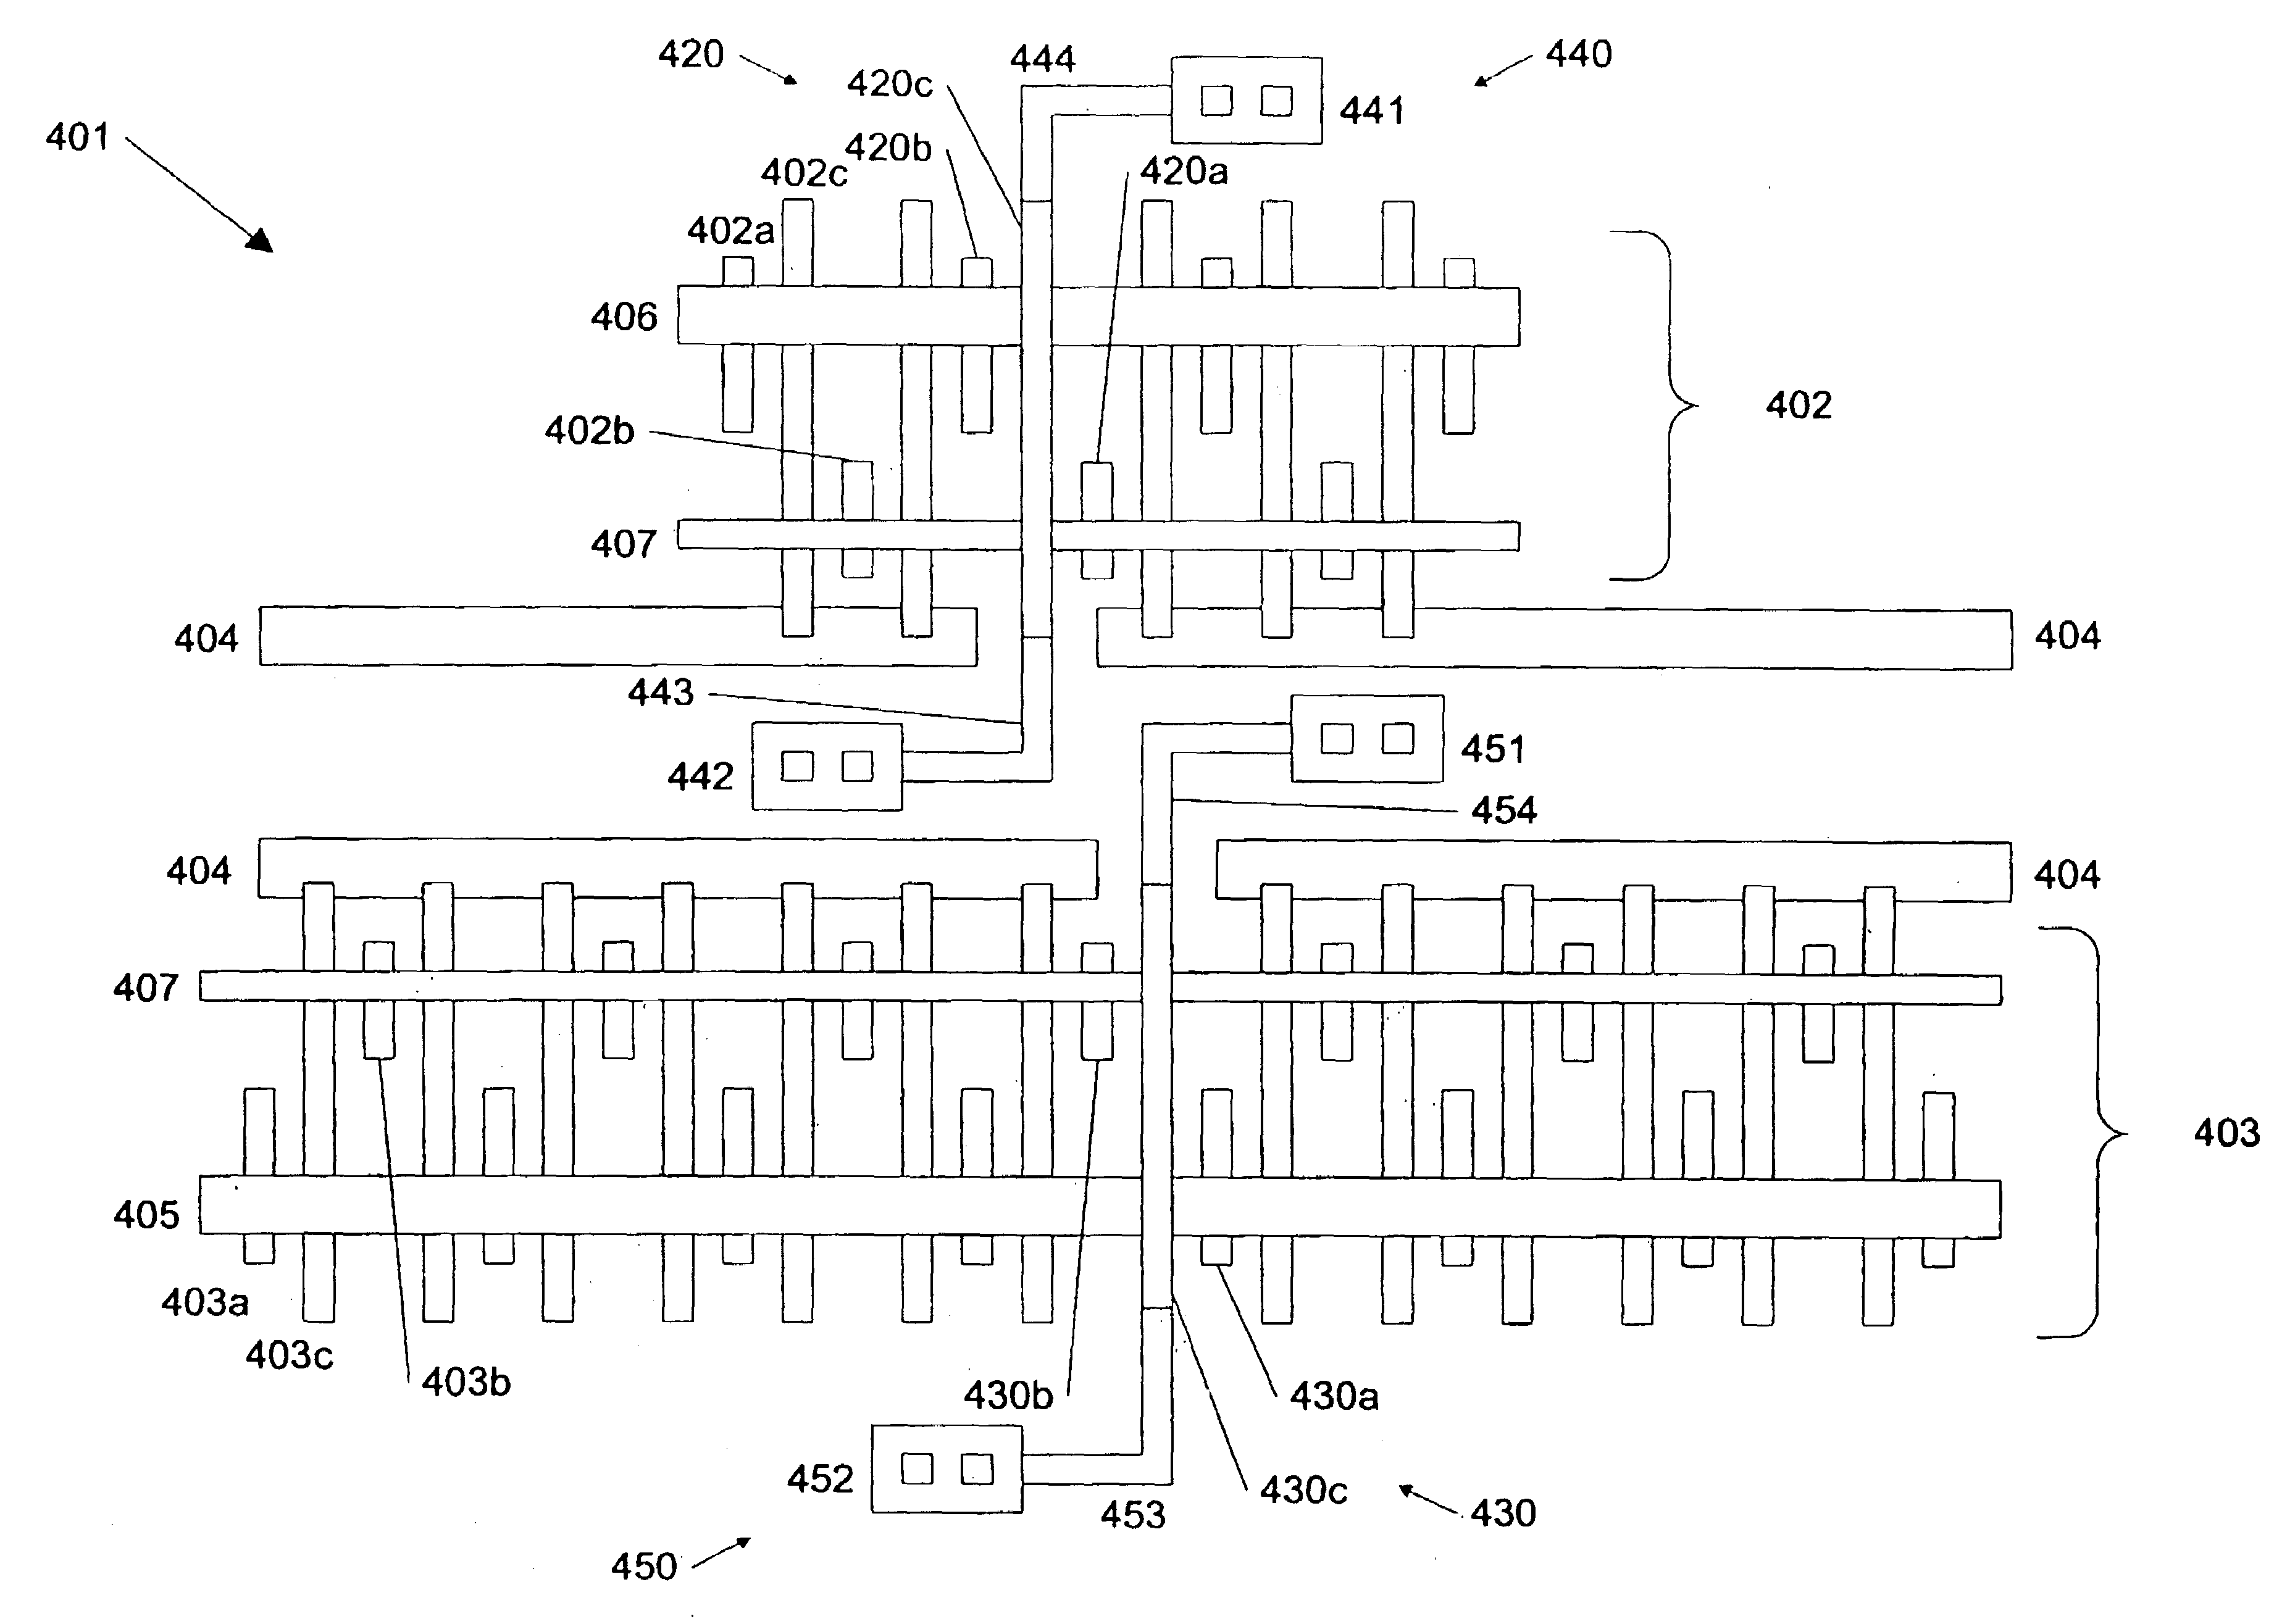 Temperature sensor for high power very large scale integration circuits